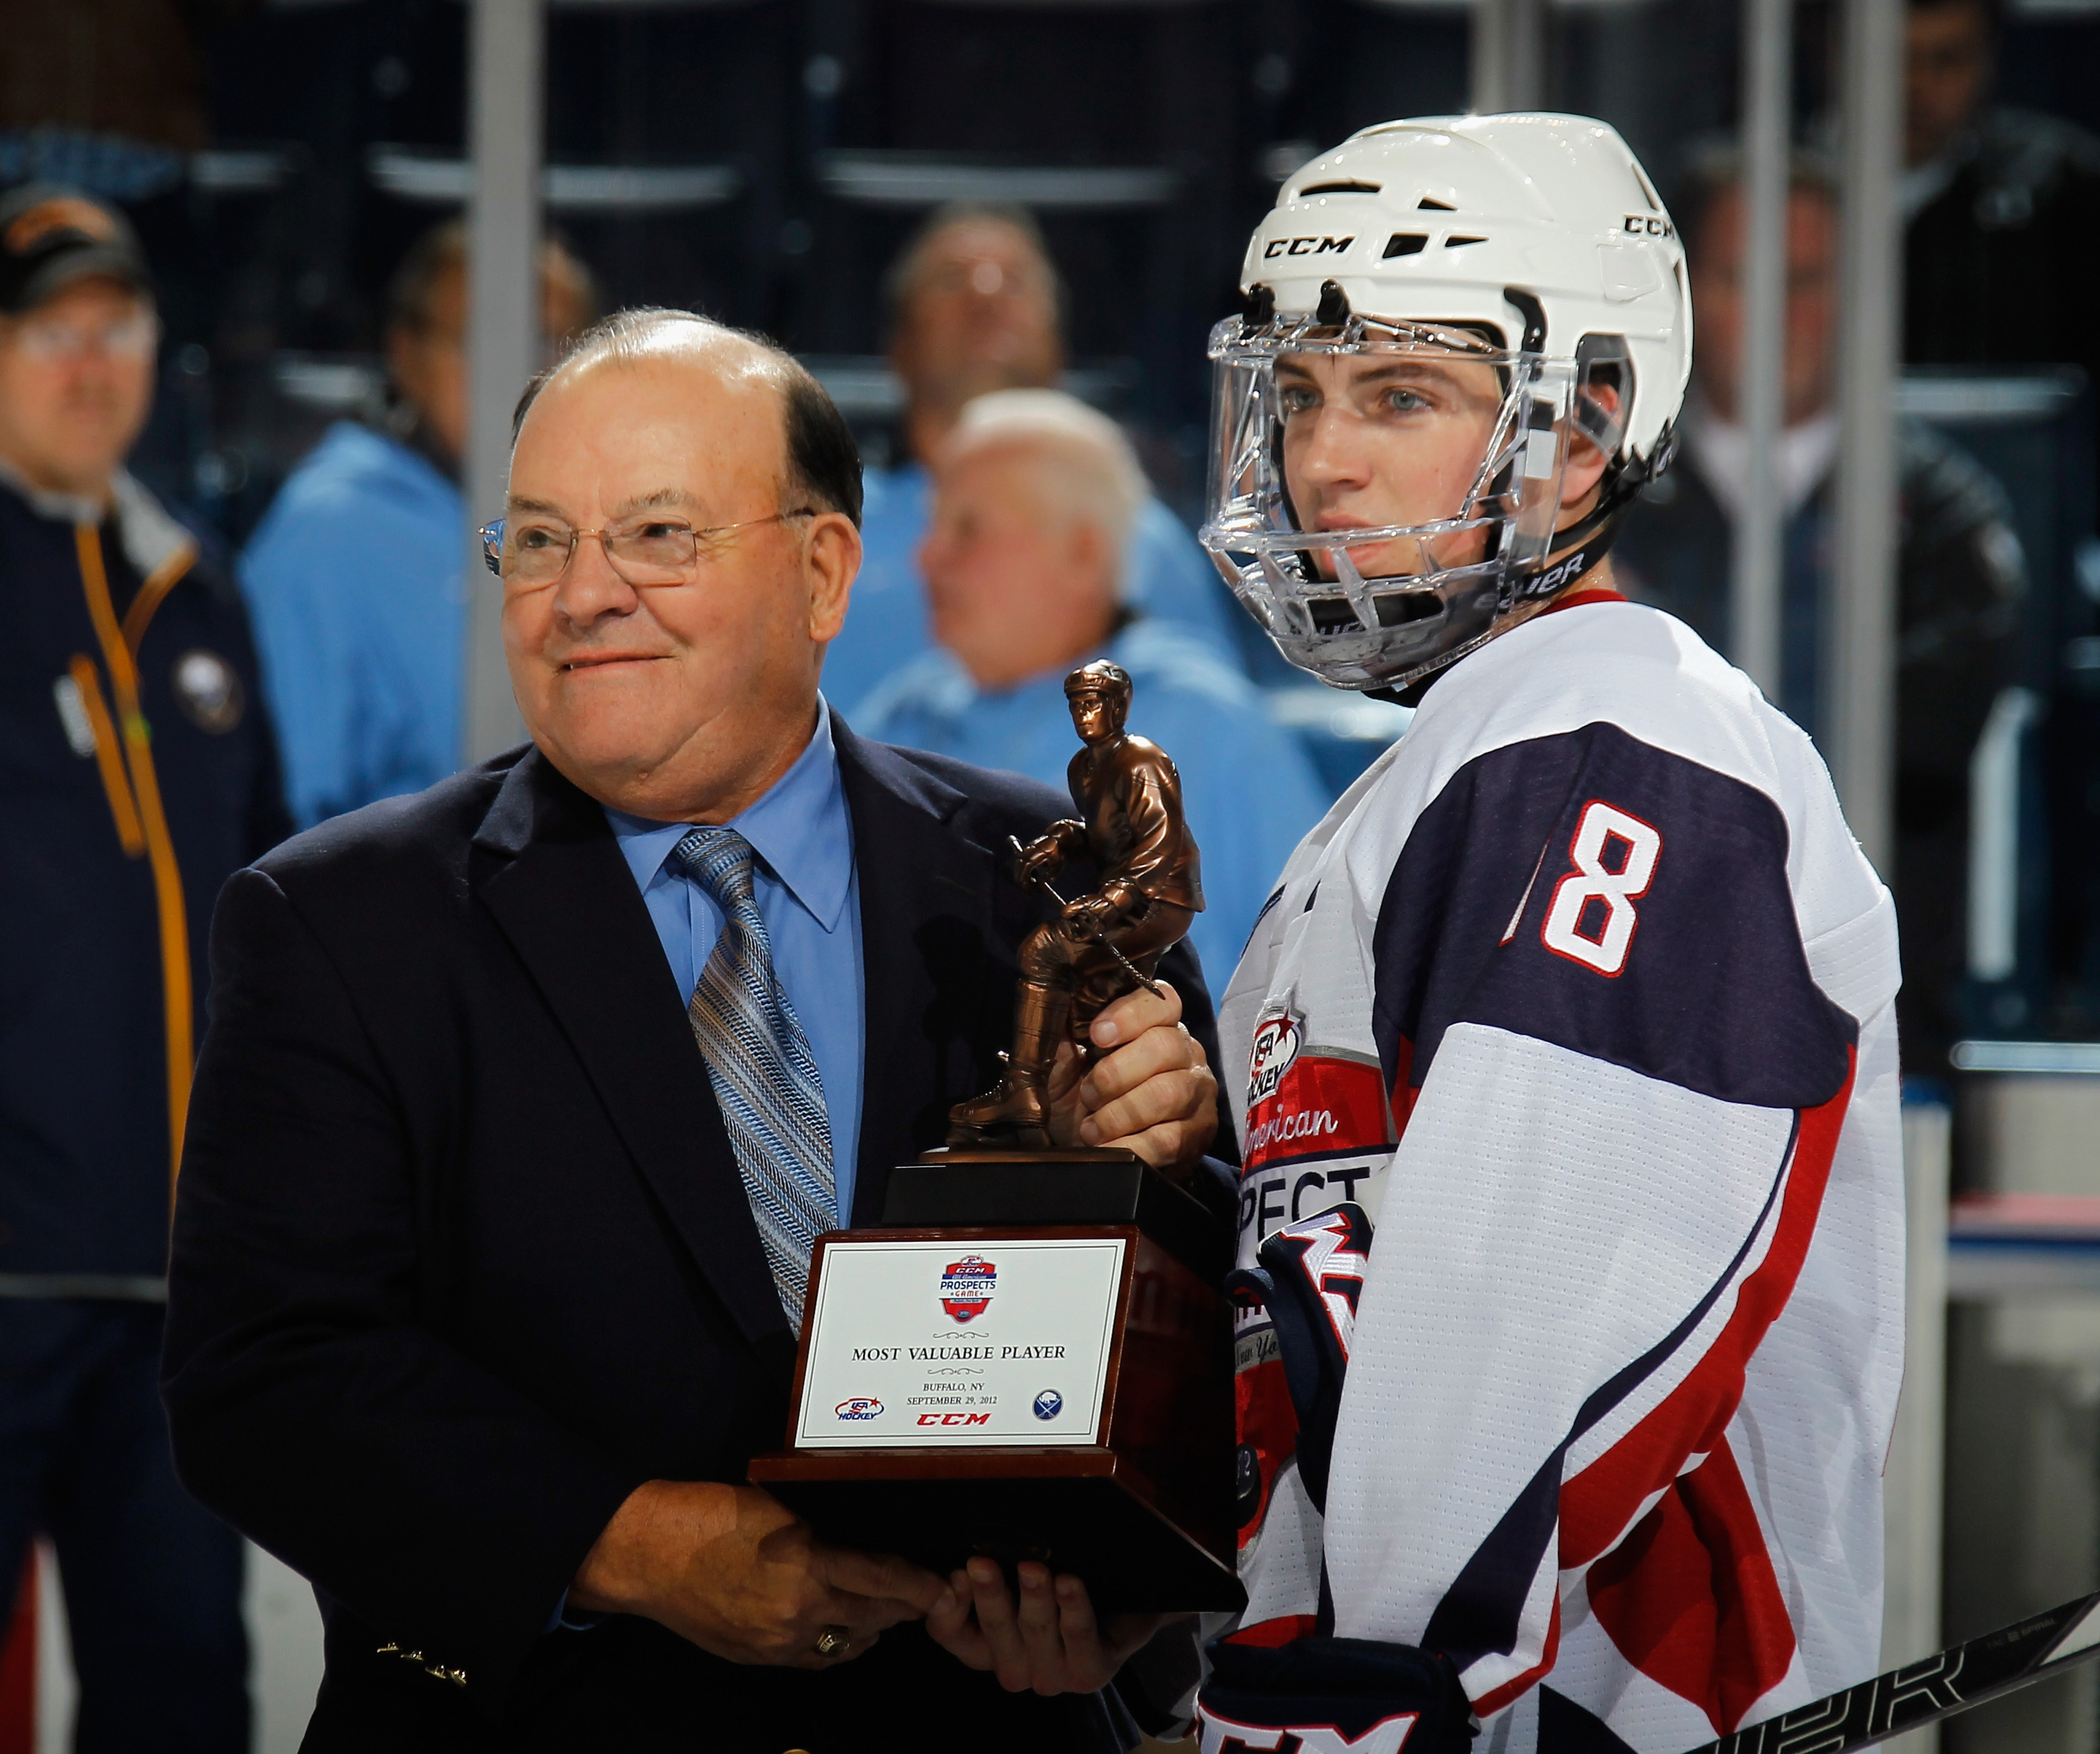 Ryan Fitzgerald collects his MVP trophy from Scotty Bowman following the All-American Prospects Game.